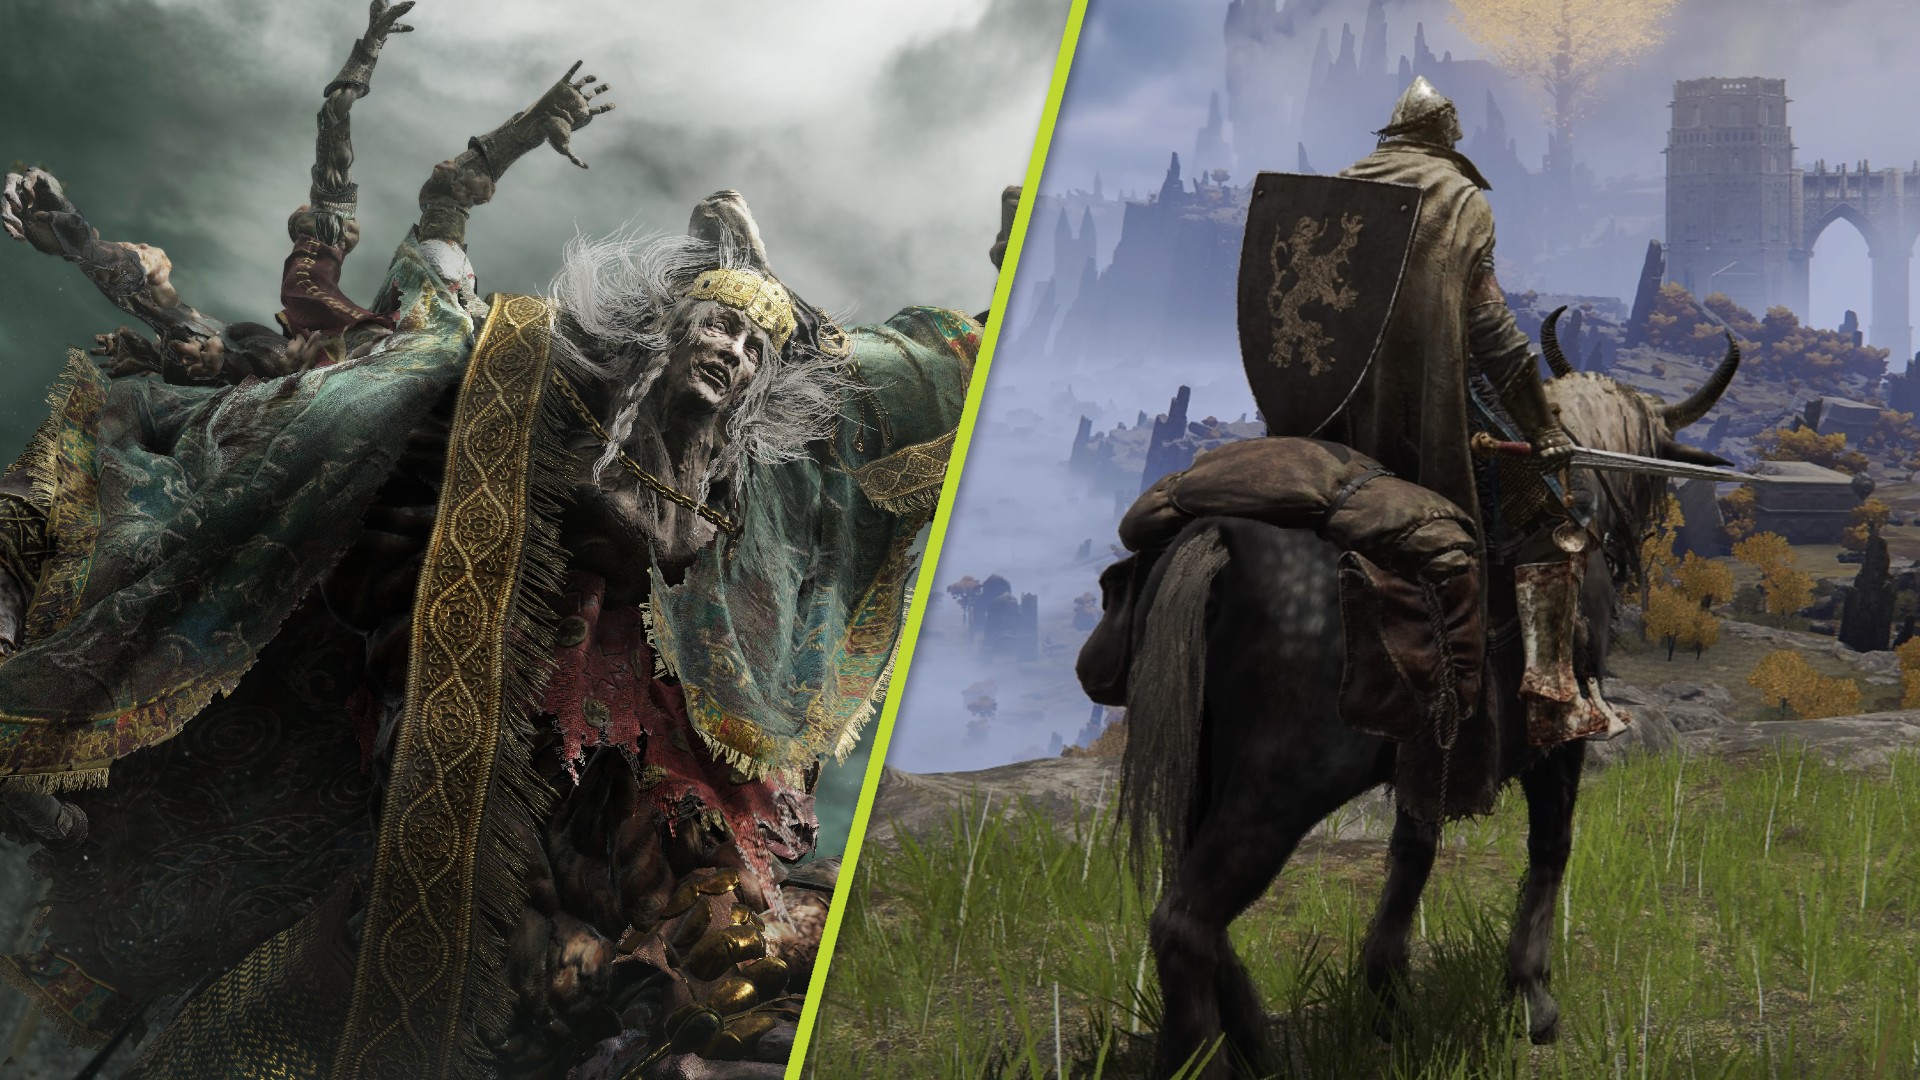 Elden Ring is currently the highest-rated PS5 and Xbox Series X